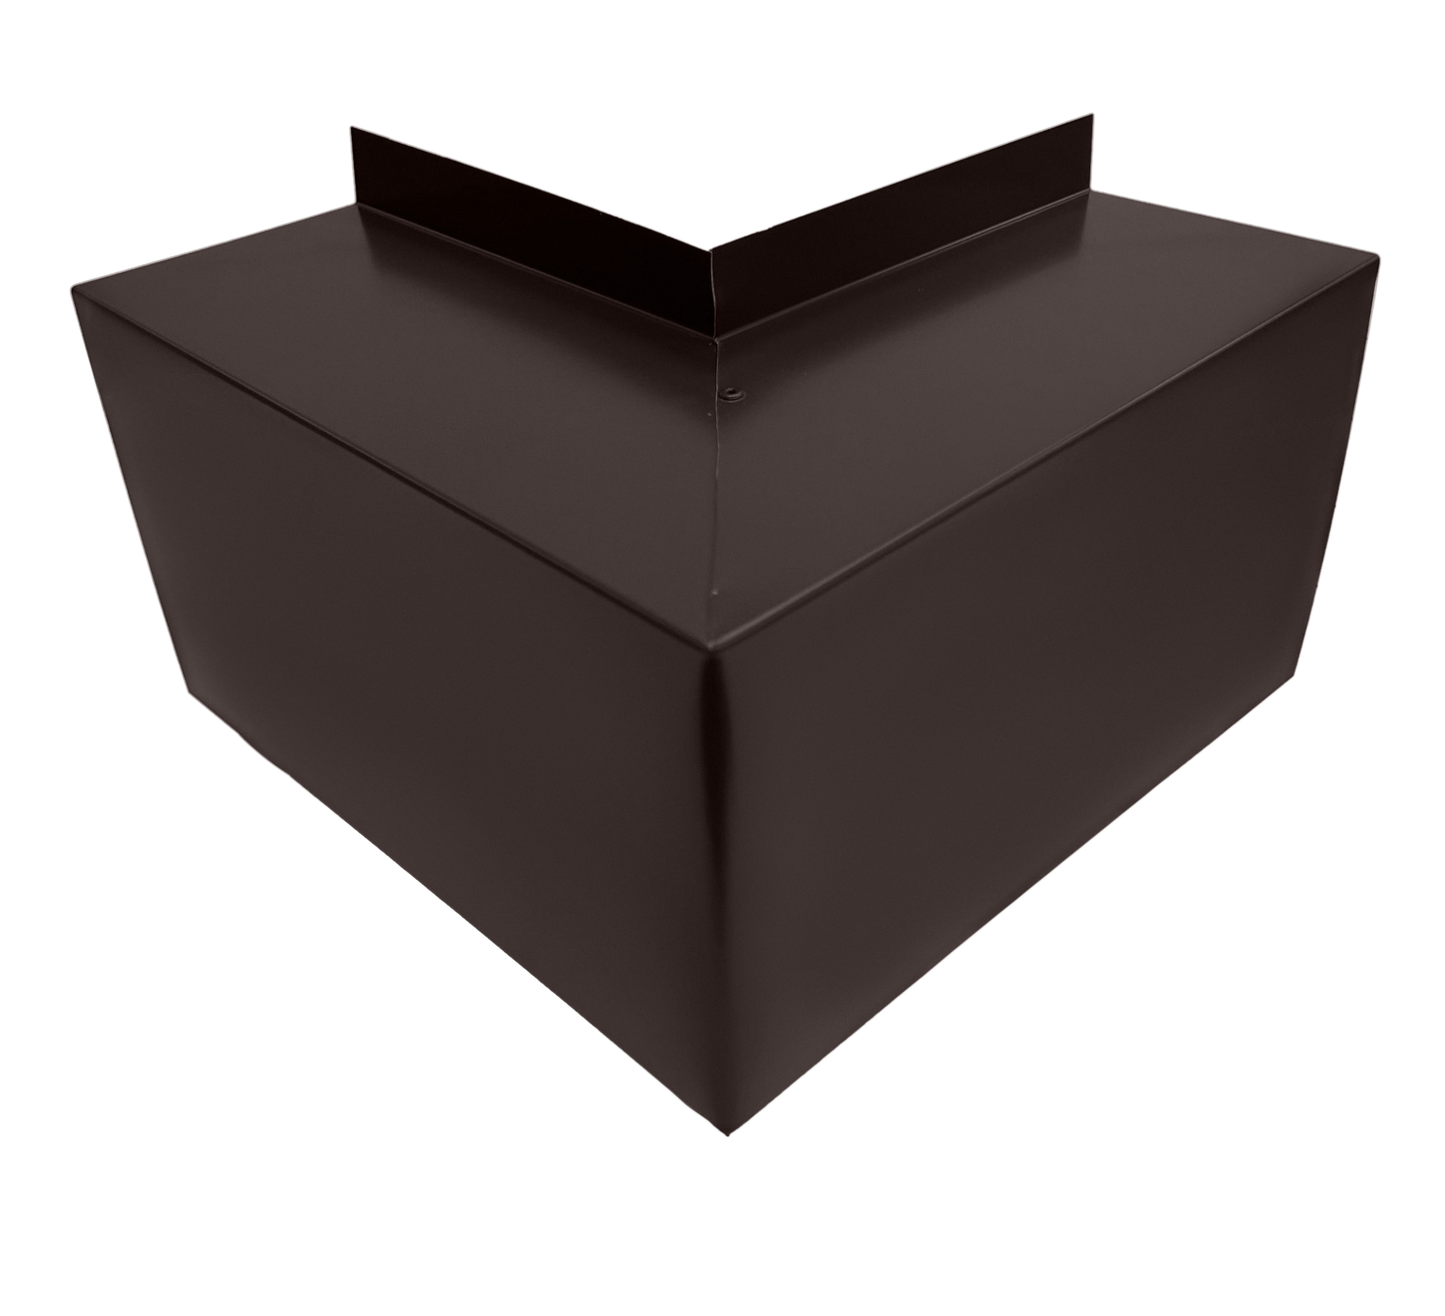 A high-resolution image of a dark brown, metal roof corner flashing piece. The Perma Cover Commercial Series - 24 Gauge Line Set Cover Outside Corner Elbows - Premium Quality, crafted from 24 gauge steel elbows, has a 90-degree angle to fit the corner joint of a roof, with clean, sharp edges and a smooth, matte finish for easy installation.